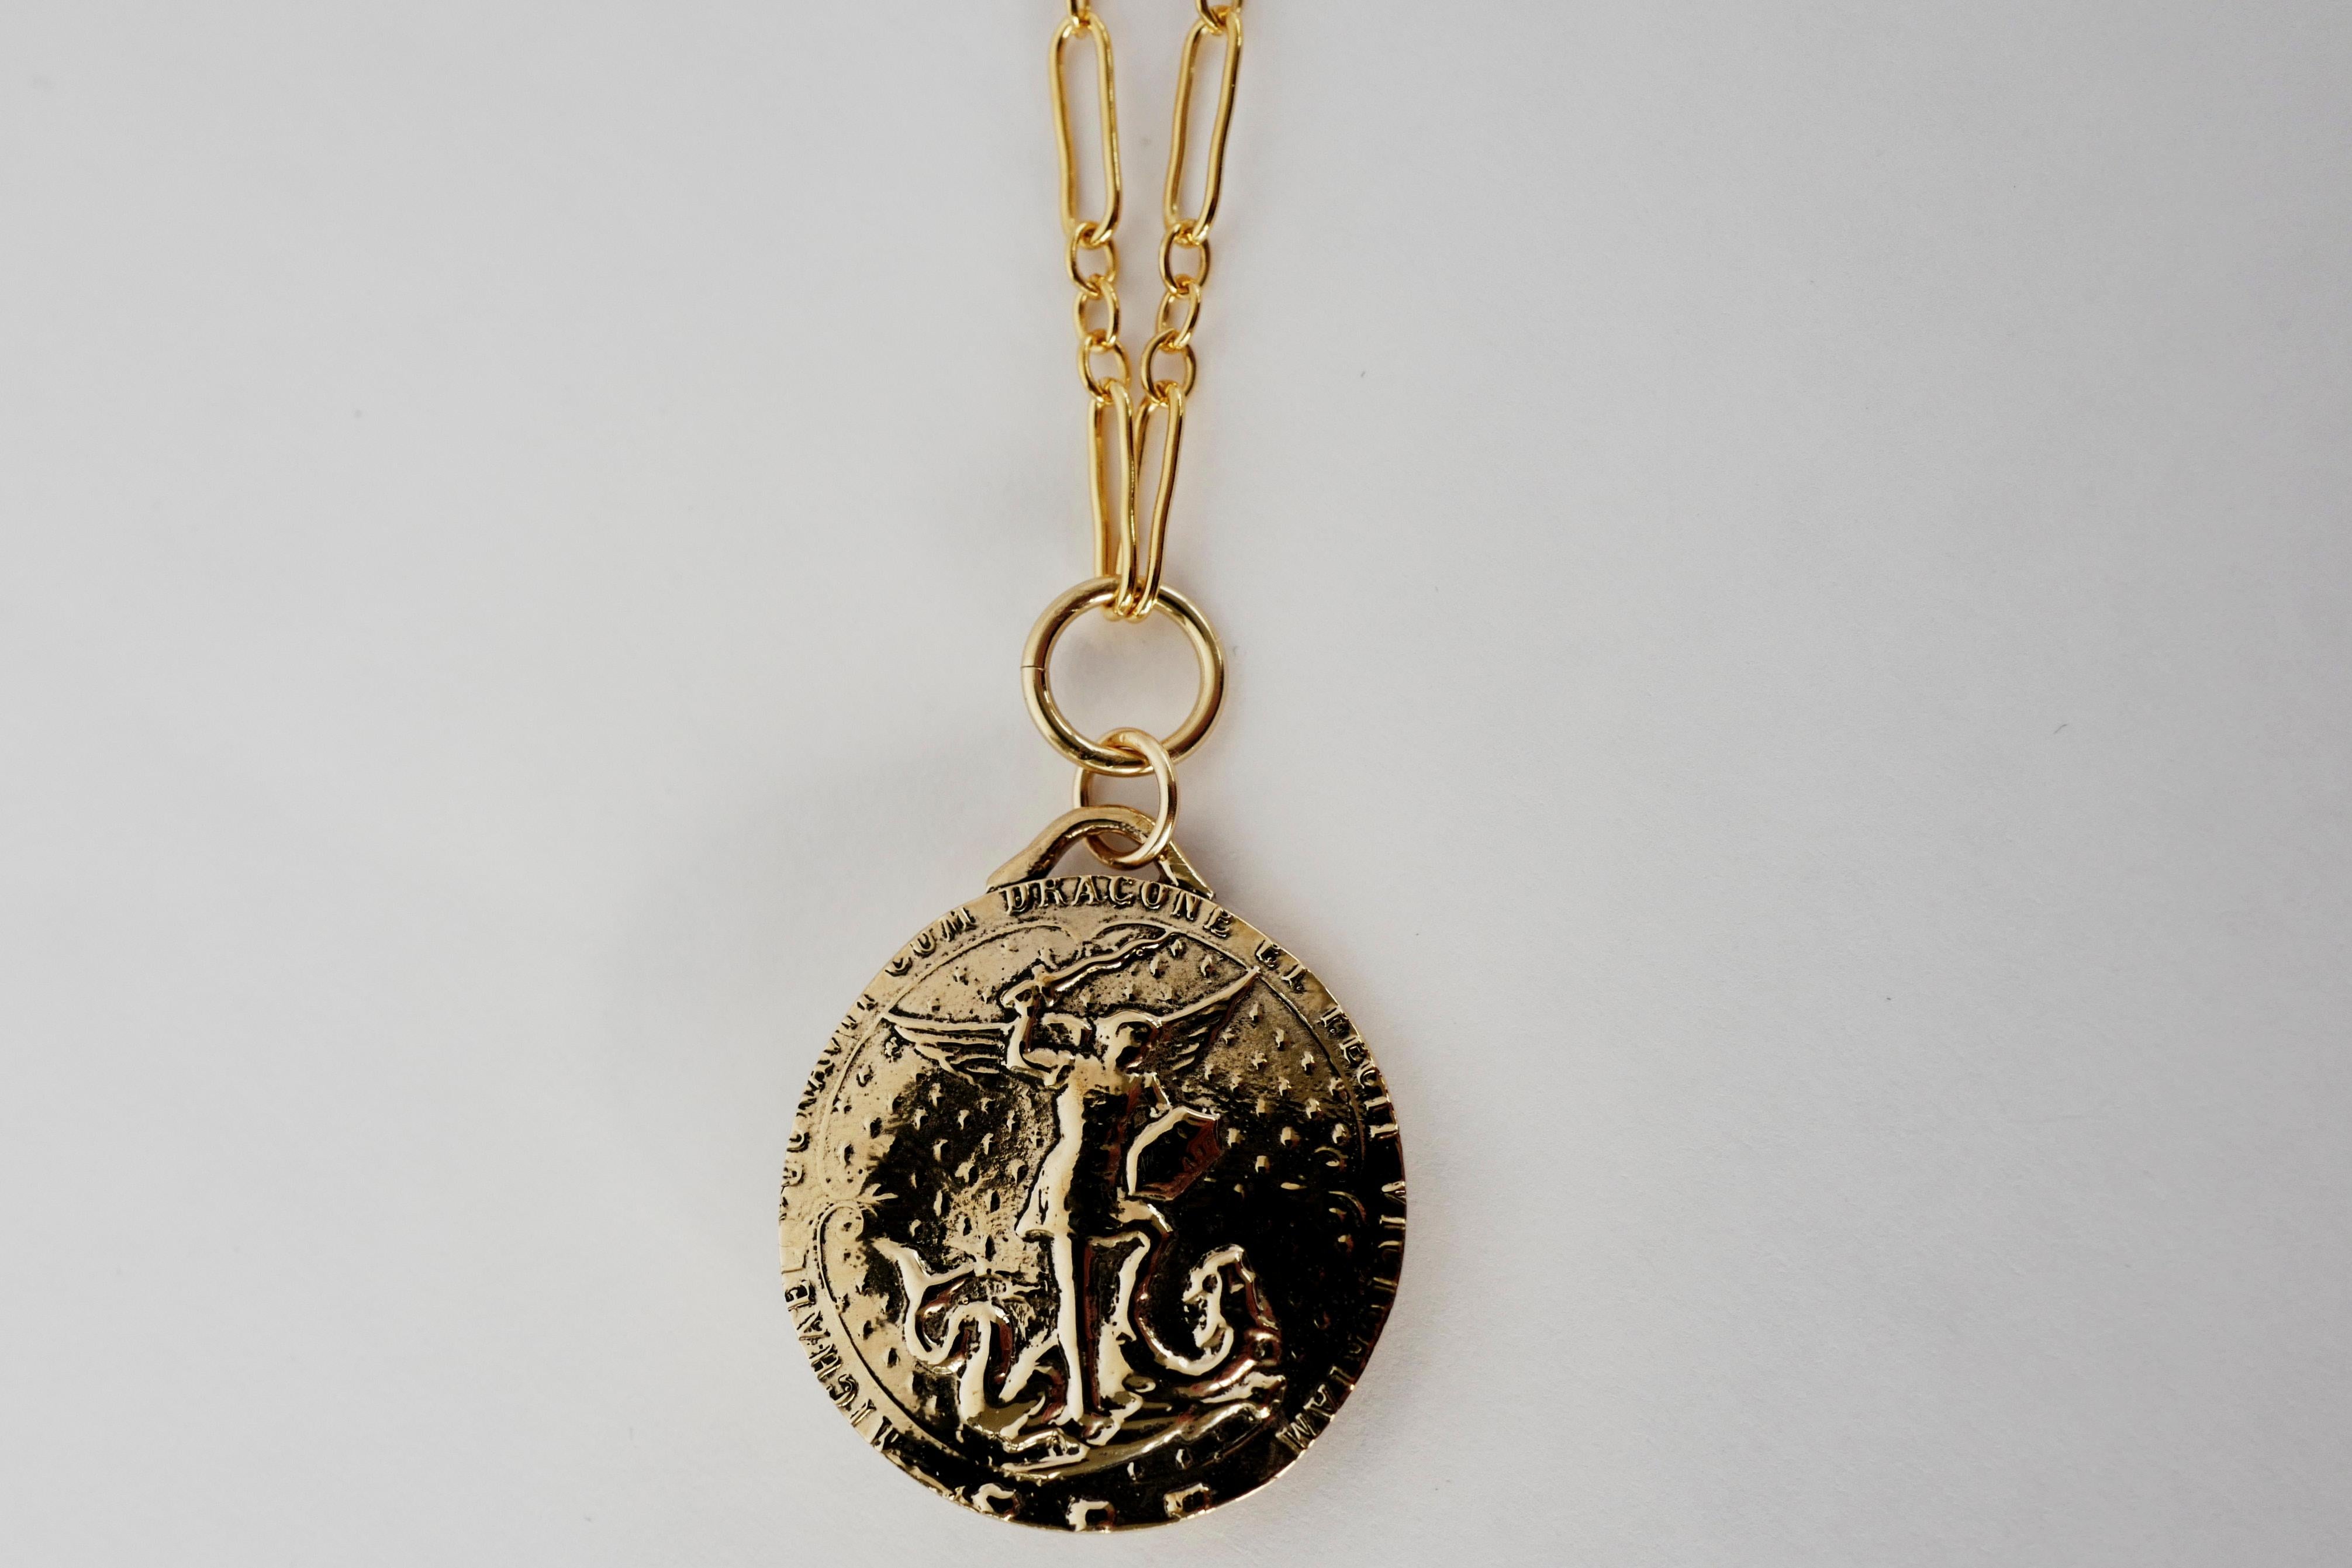 Contemporary White Diamond Joan of Arc Medal Round Coin Pendant Chain Necklace by J Dauphin For Sale